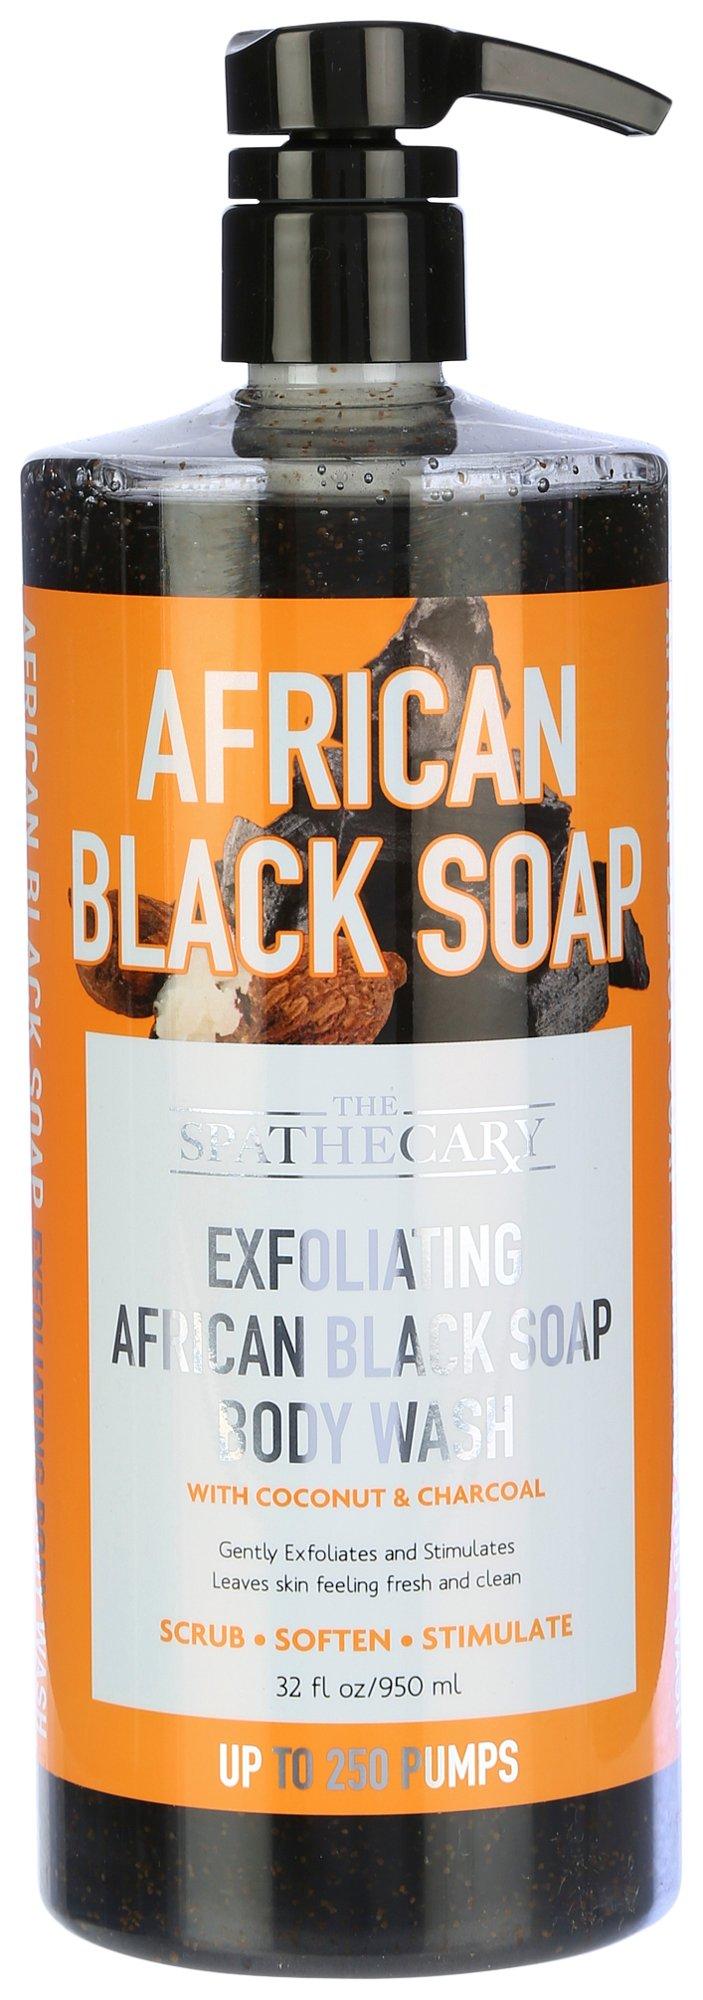 The Spathecary Exfoliating African Black Soap Body Wash